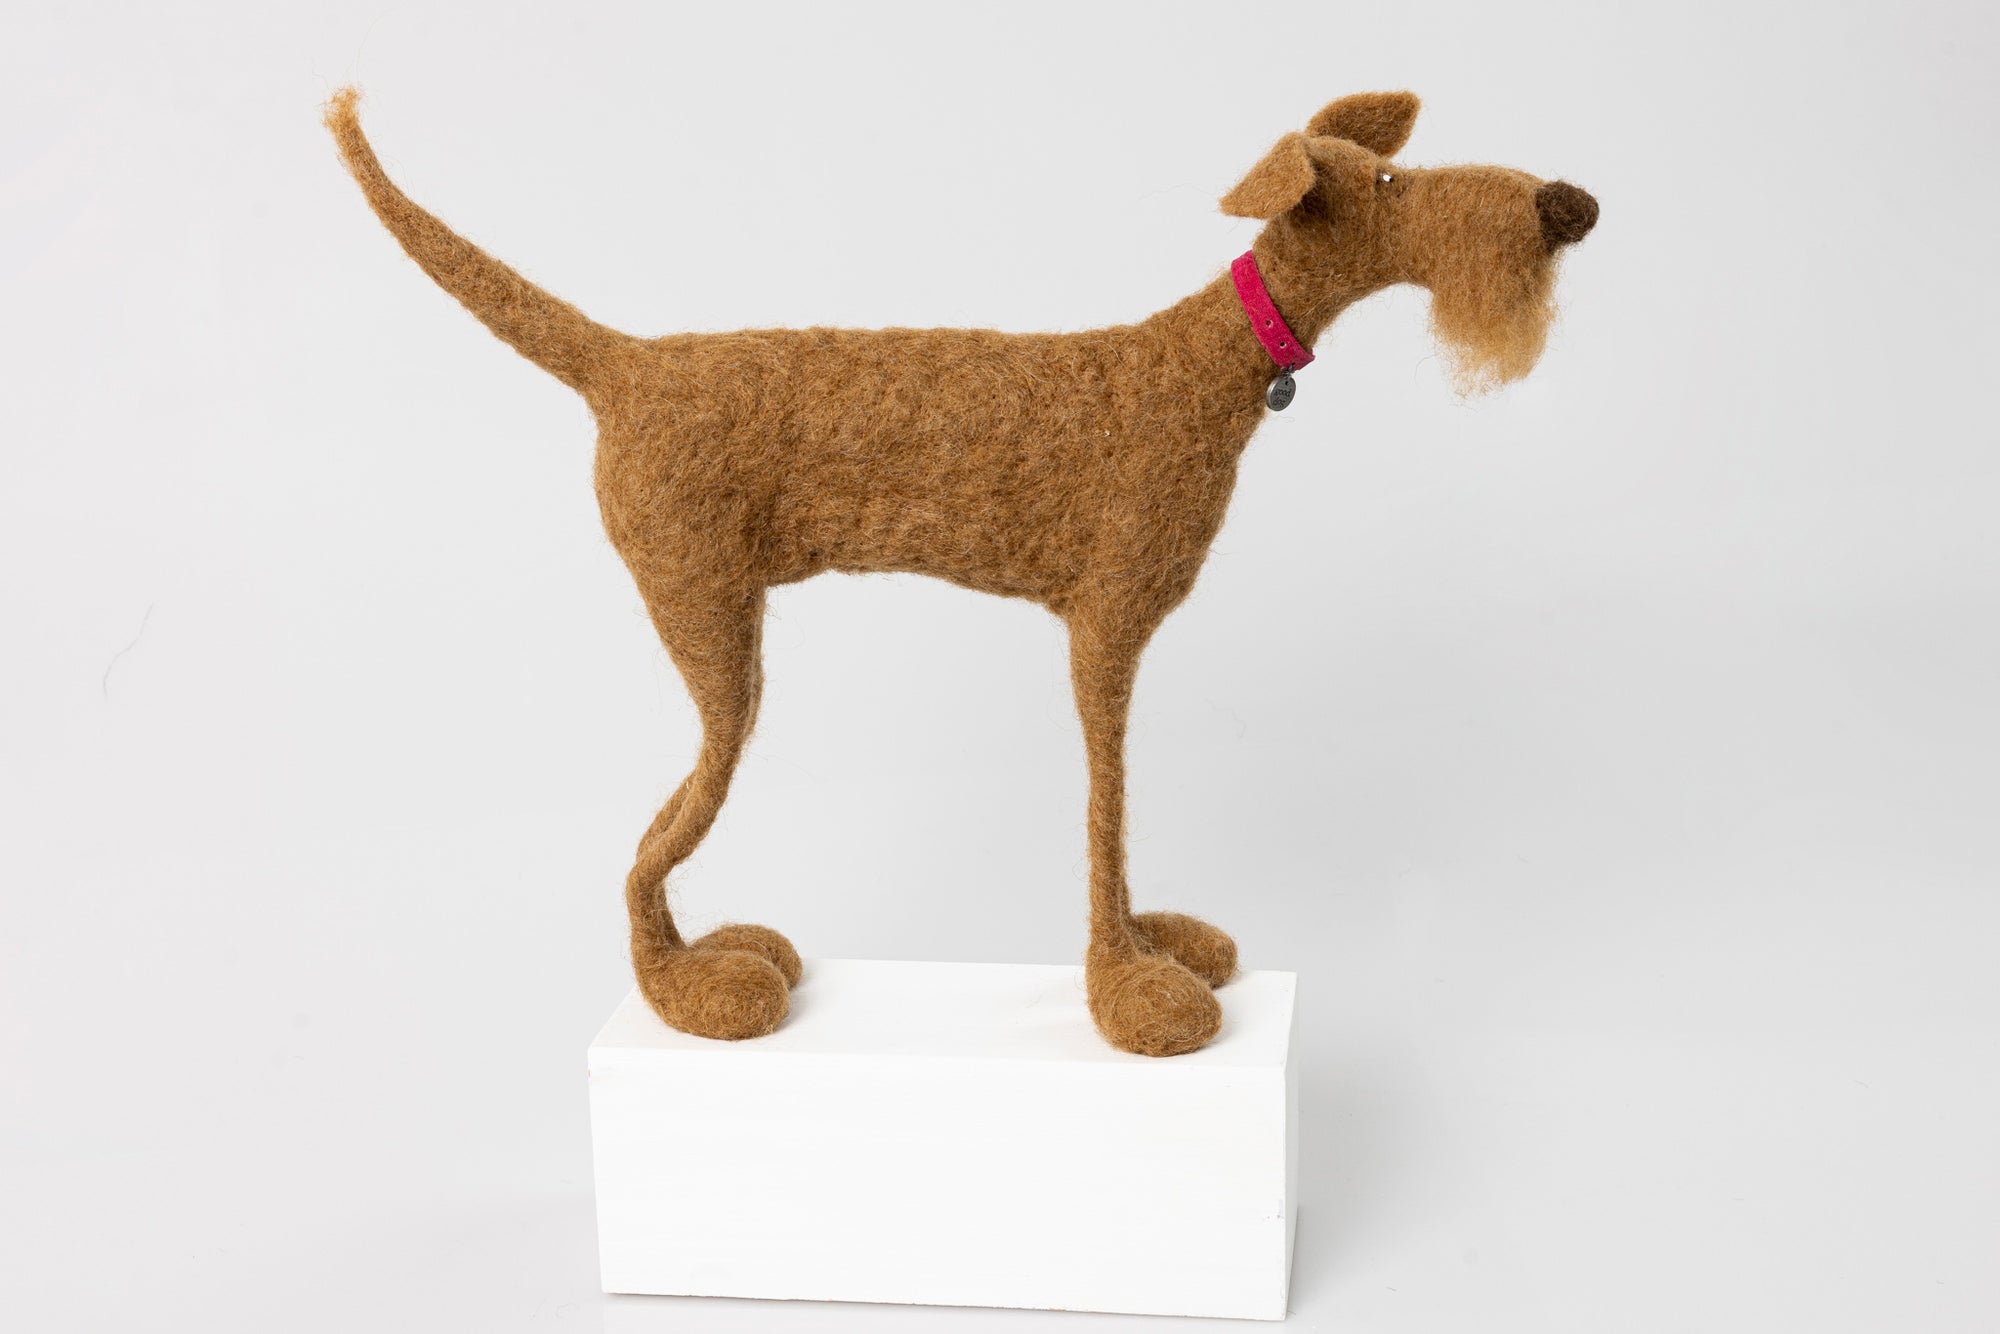 'Brisket' needlefelt character dog by Kate Toms, available at Padstow Gallery, Cornwall